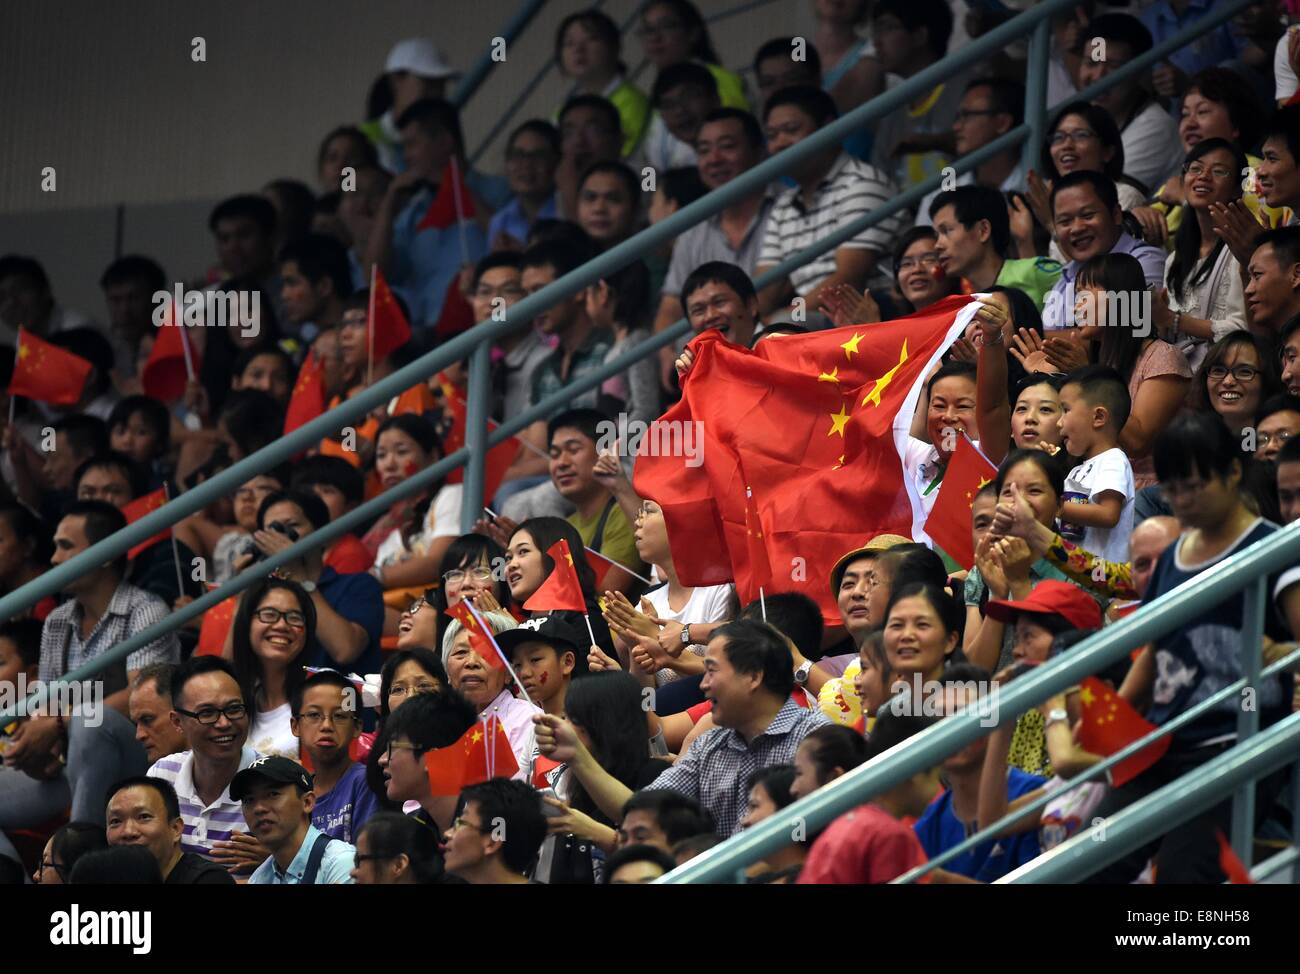 Nanning, China's Guangxi Zhuang Autonomous Region. 12th Oct, 2014. Chinese spectators display national flags of China during the individual apparatus finals of the 45th Gymnastics World Championships in Nanning, capital of south China's Guangxi Zhuang Autonomous Region, Oct. 12, 2014. Credit:  Zhou Hua/Xinhua/Alamy Live News Stock Photo